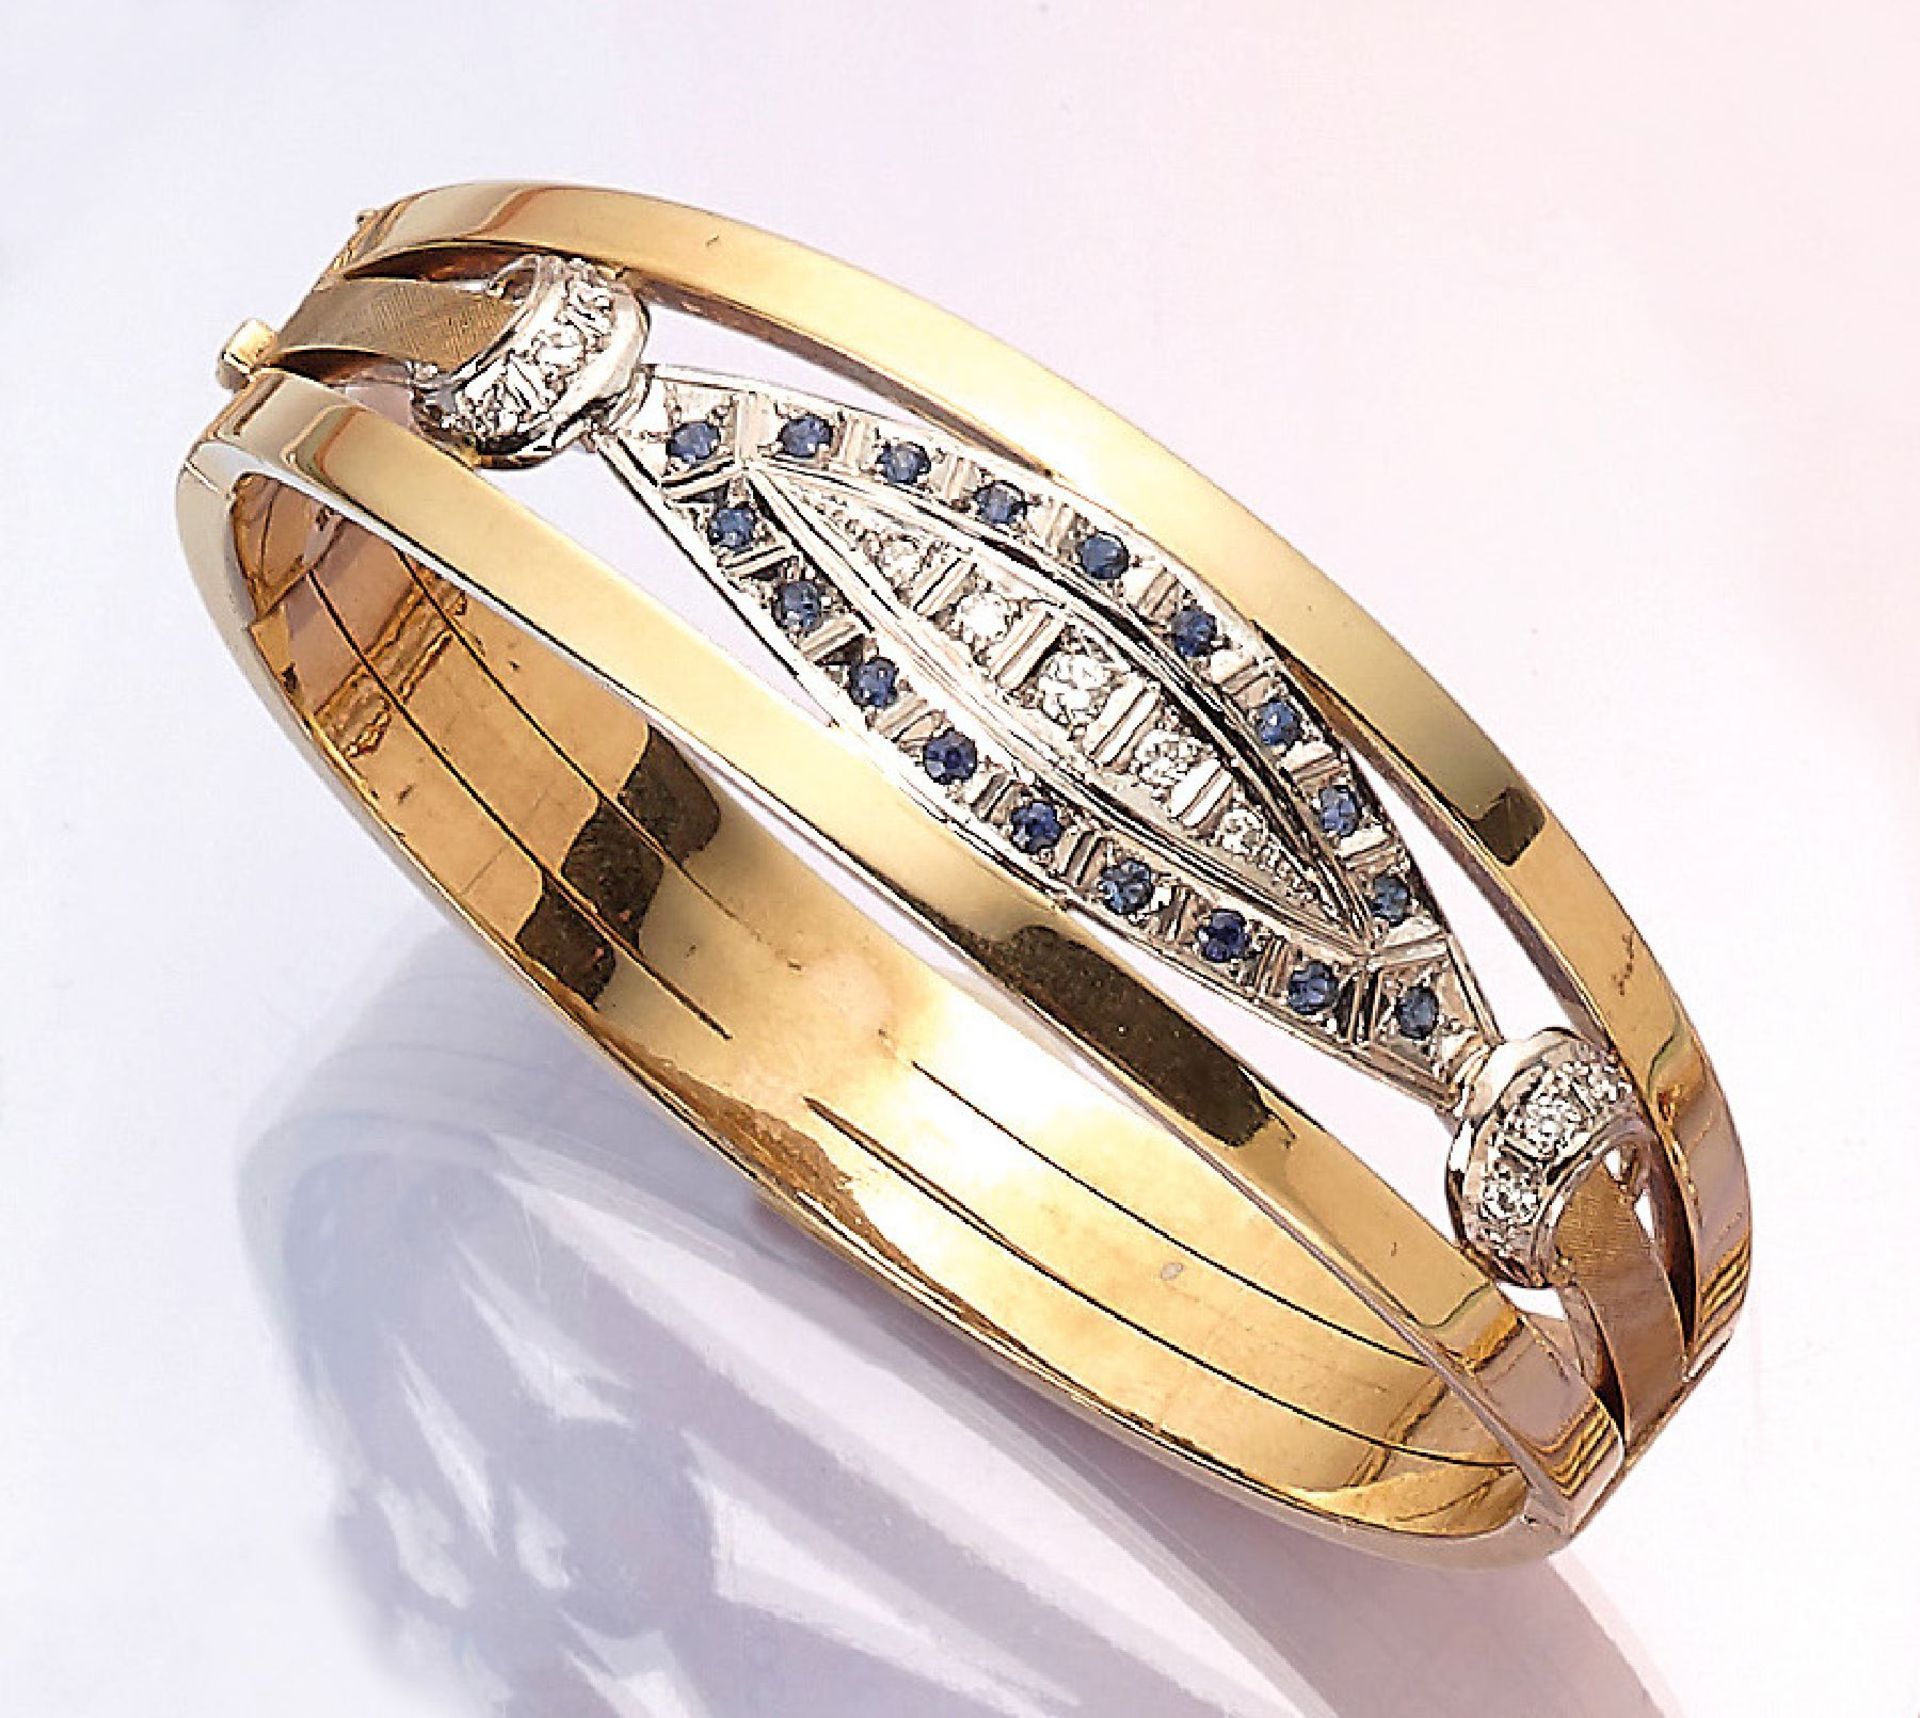 14 kt gold bangle with sapphires and diamonds , YG/WG 585/000, 11 brilliants total approx.0.35 ct